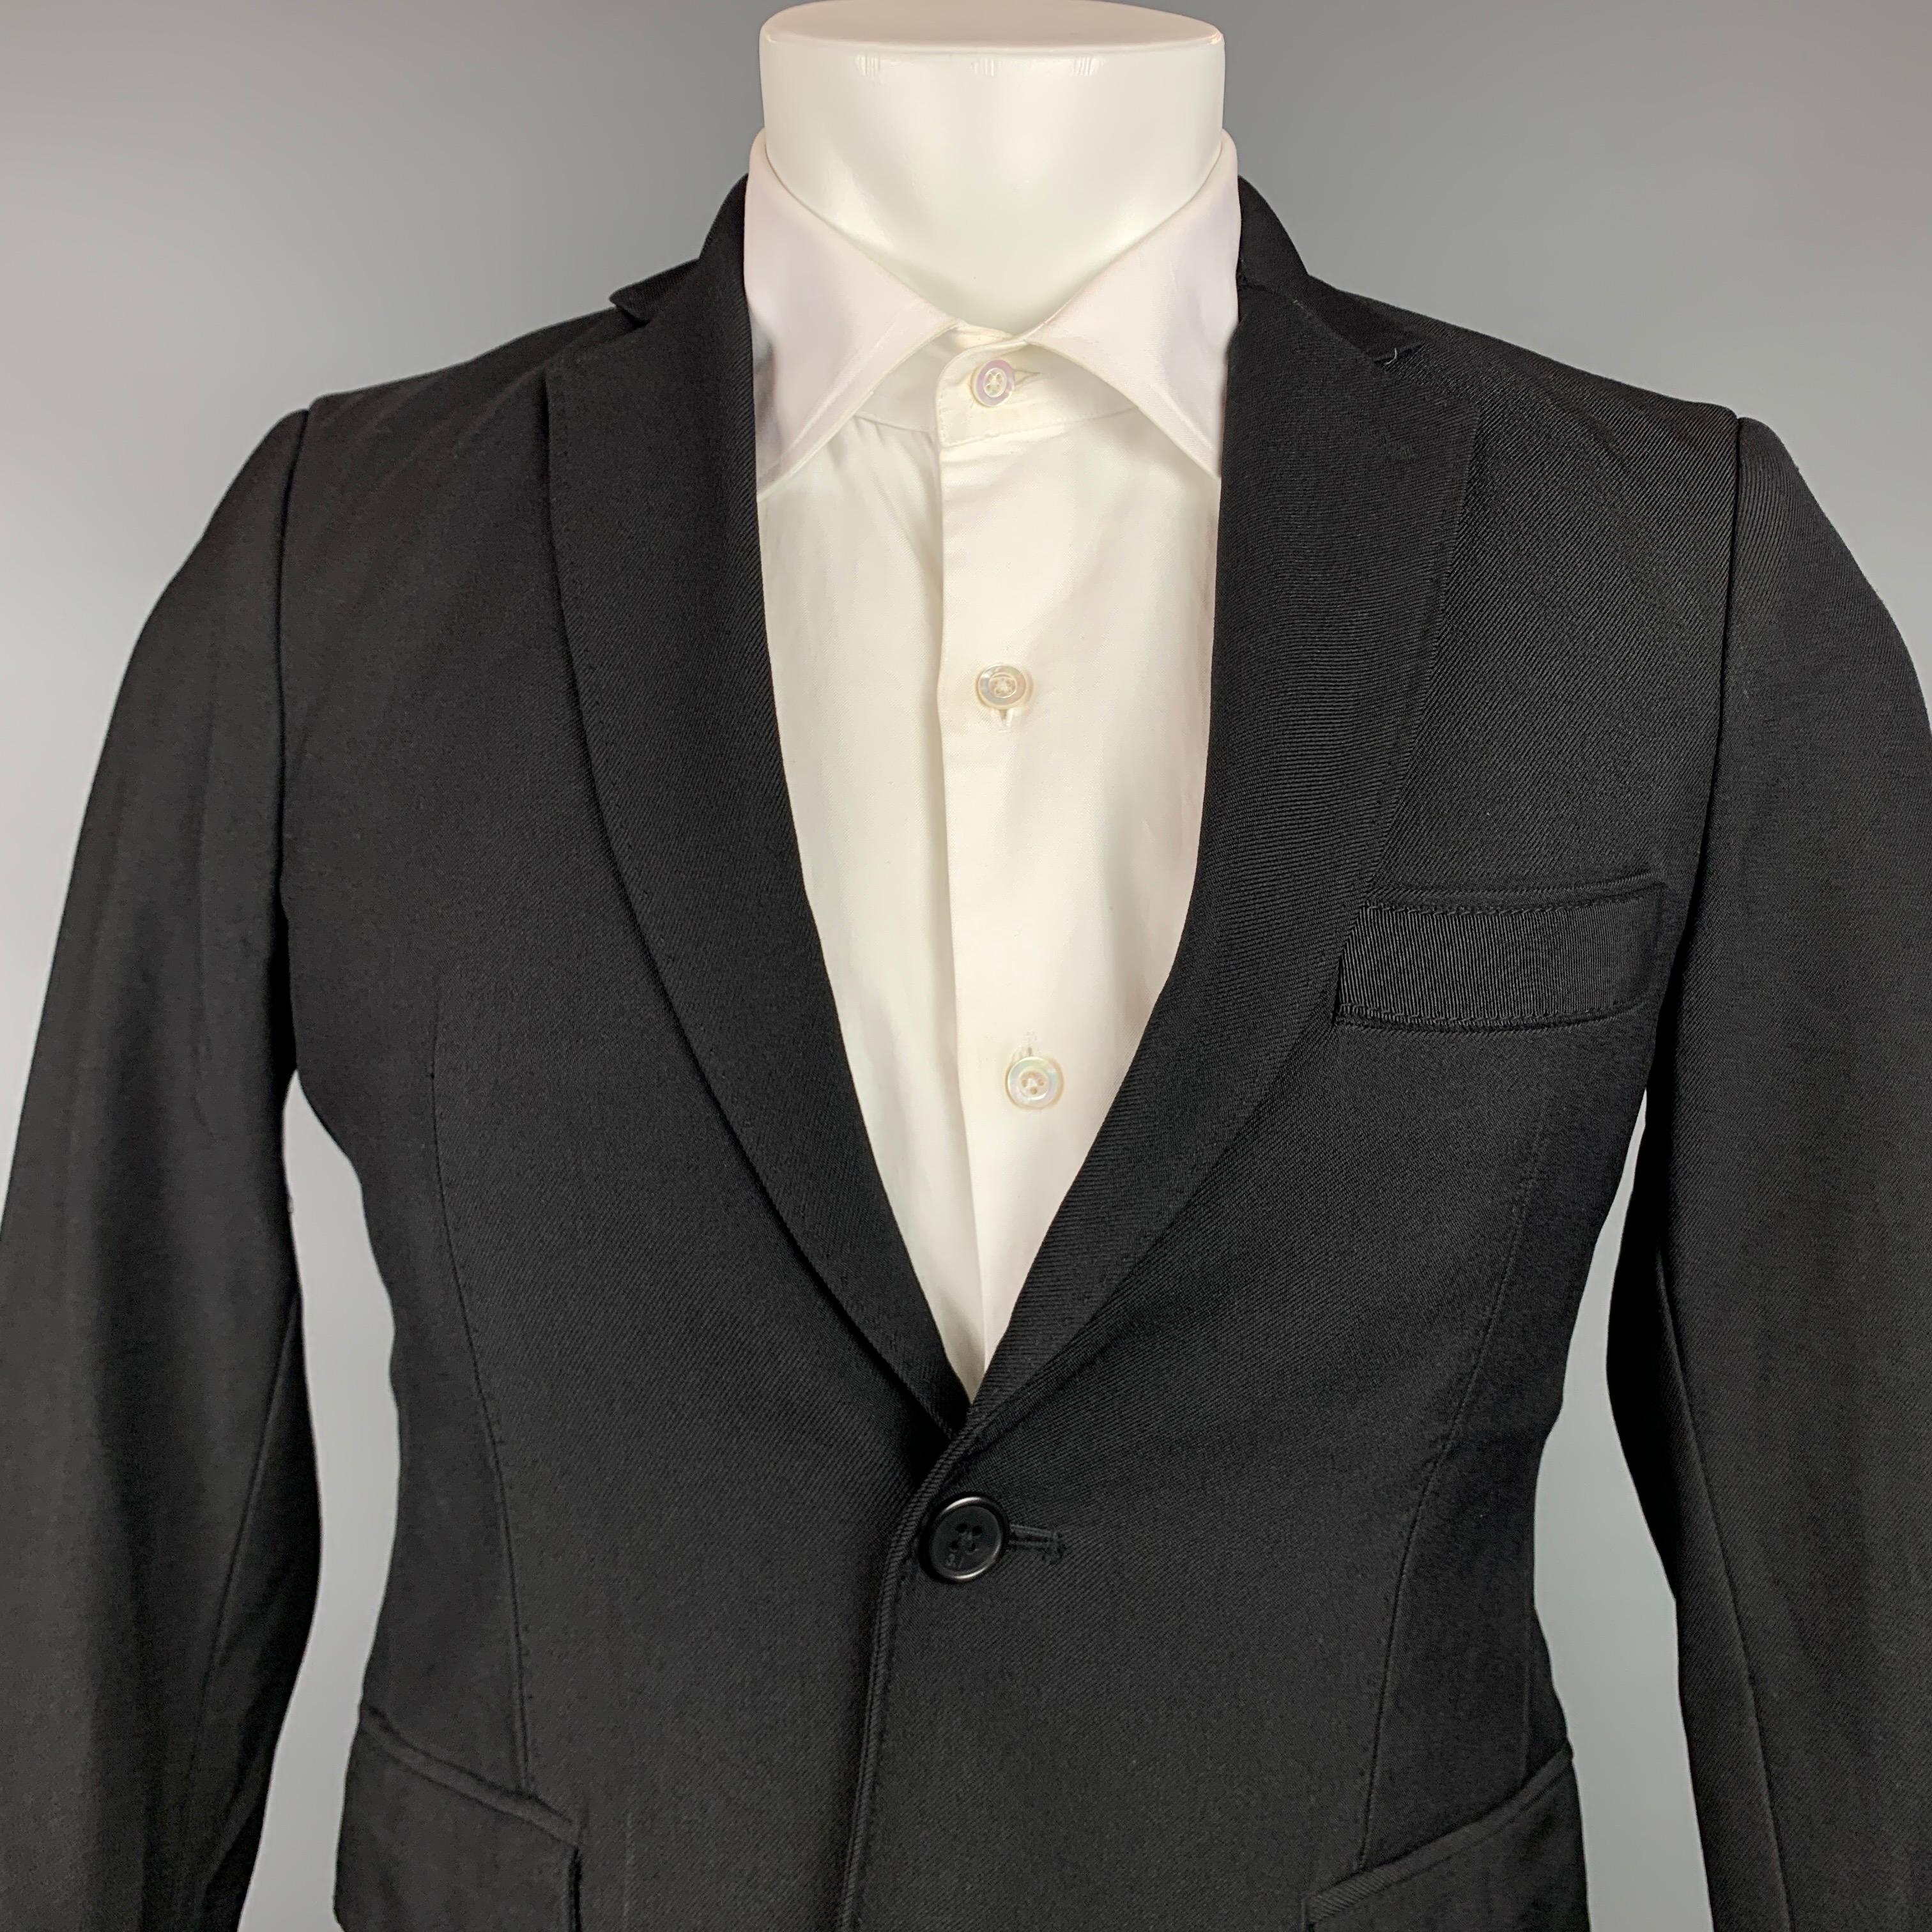 3.1 PHILLIP LIM sport coat comes in a black wool / polyamide with a half liner featuring a notch lapel, patch pockets, and a double button closure.

Very Good Pre-Owned Condition.
Marked: 36

Measurements:

Shoulder: 16.5 in.
Chest: 38 in.
Sleeve: